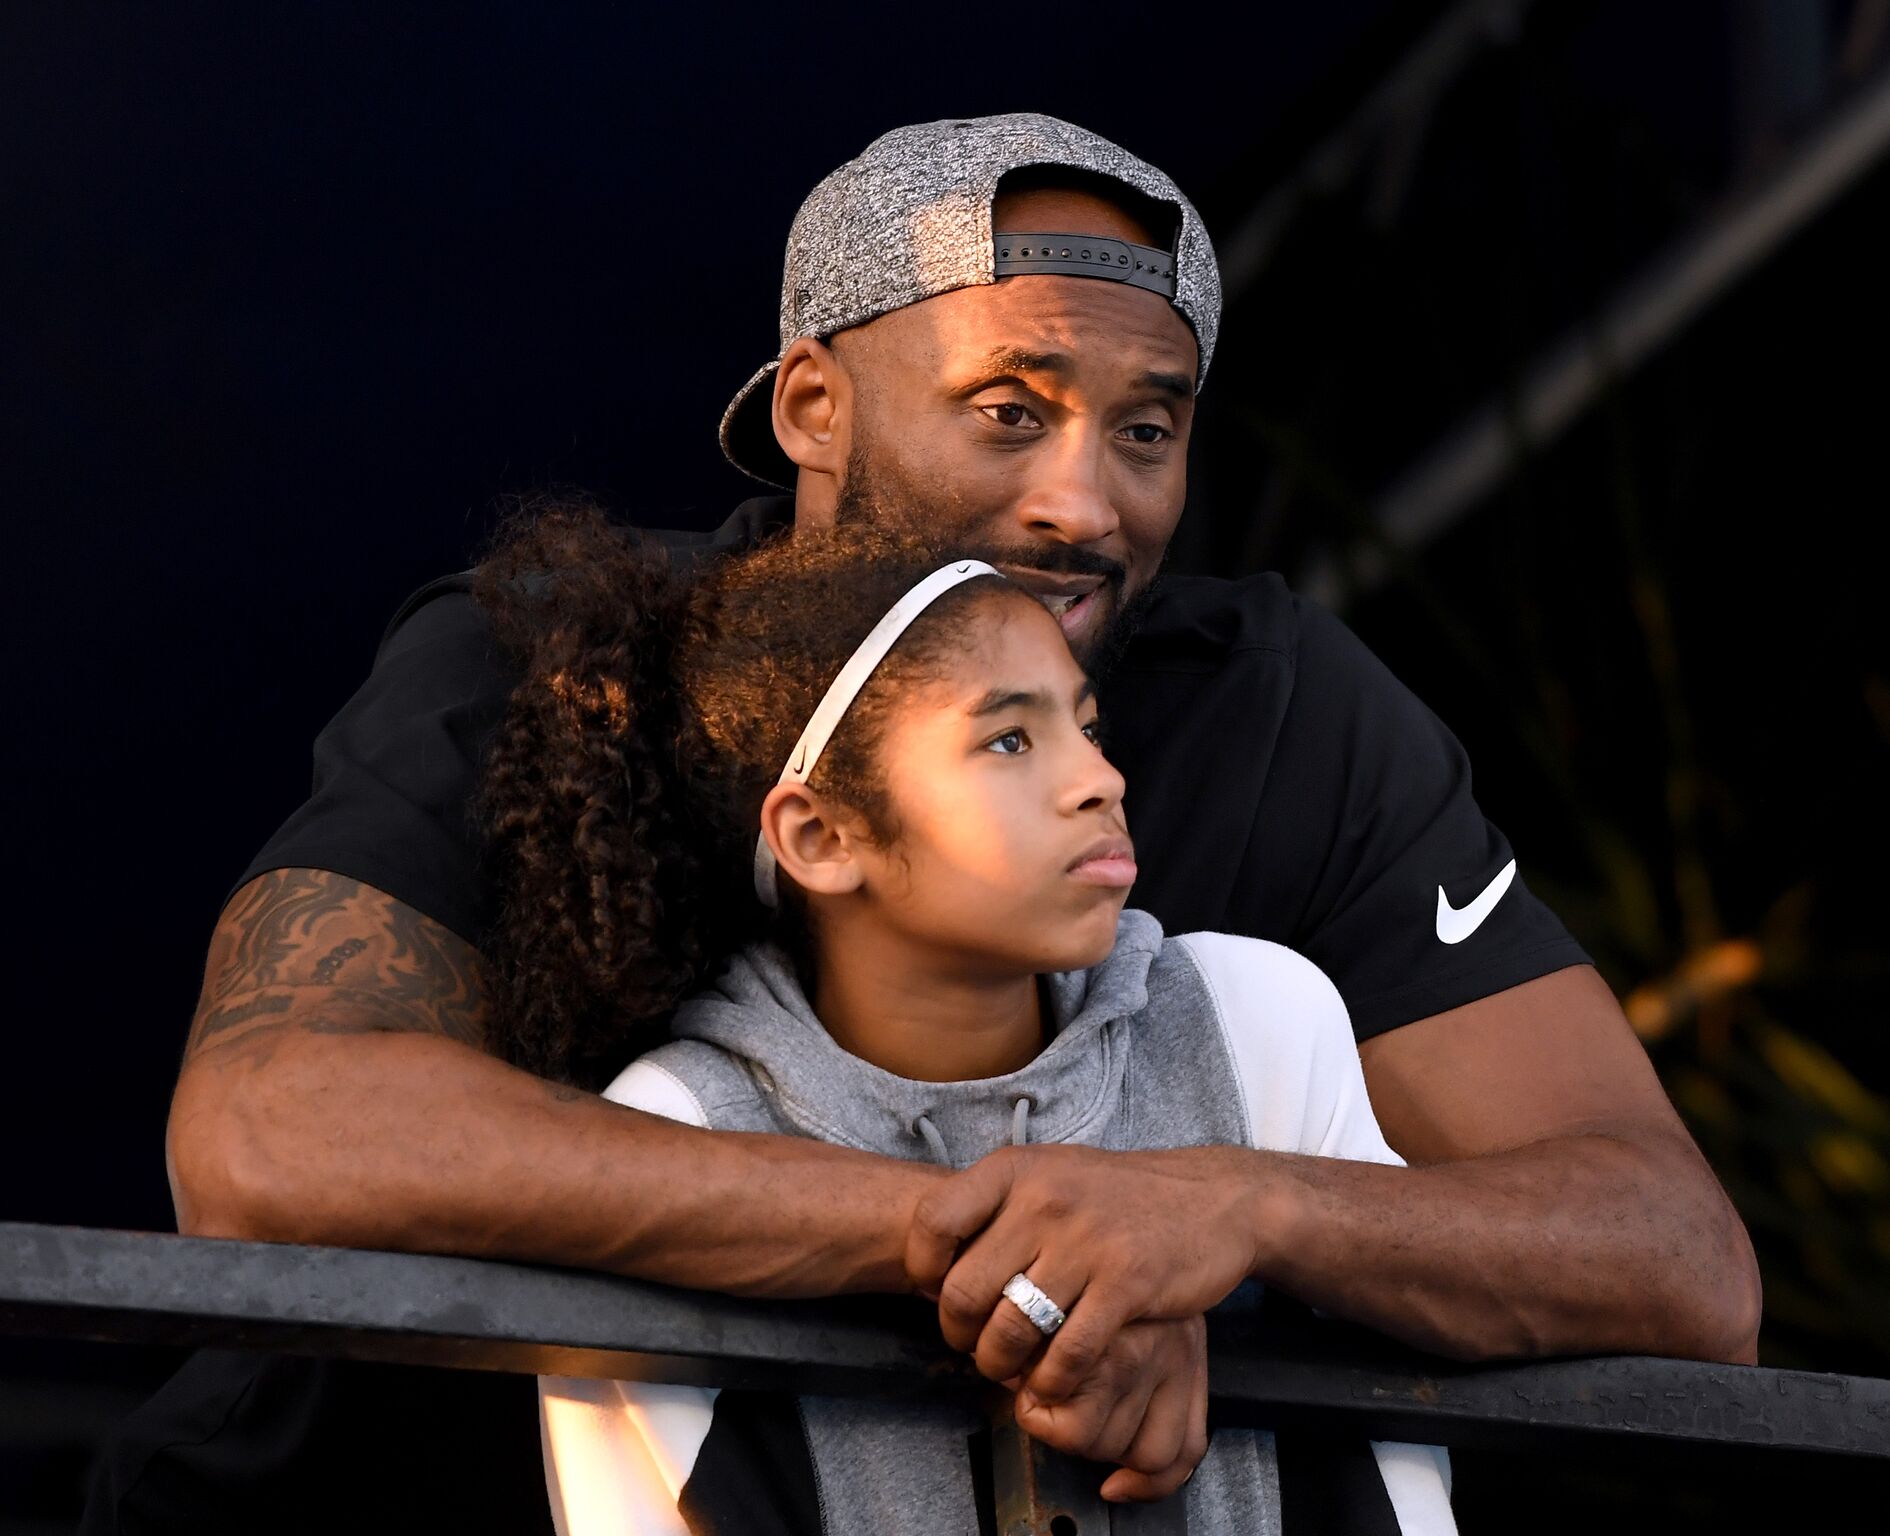 Kobe Bryant and daughter Gianna Bryant watch during day 2 of the Phillips 66 National Swimming Championships at the Woollett Aquatics Center on July 26, 2018 in Irvine, California. | Photo: Getty Images